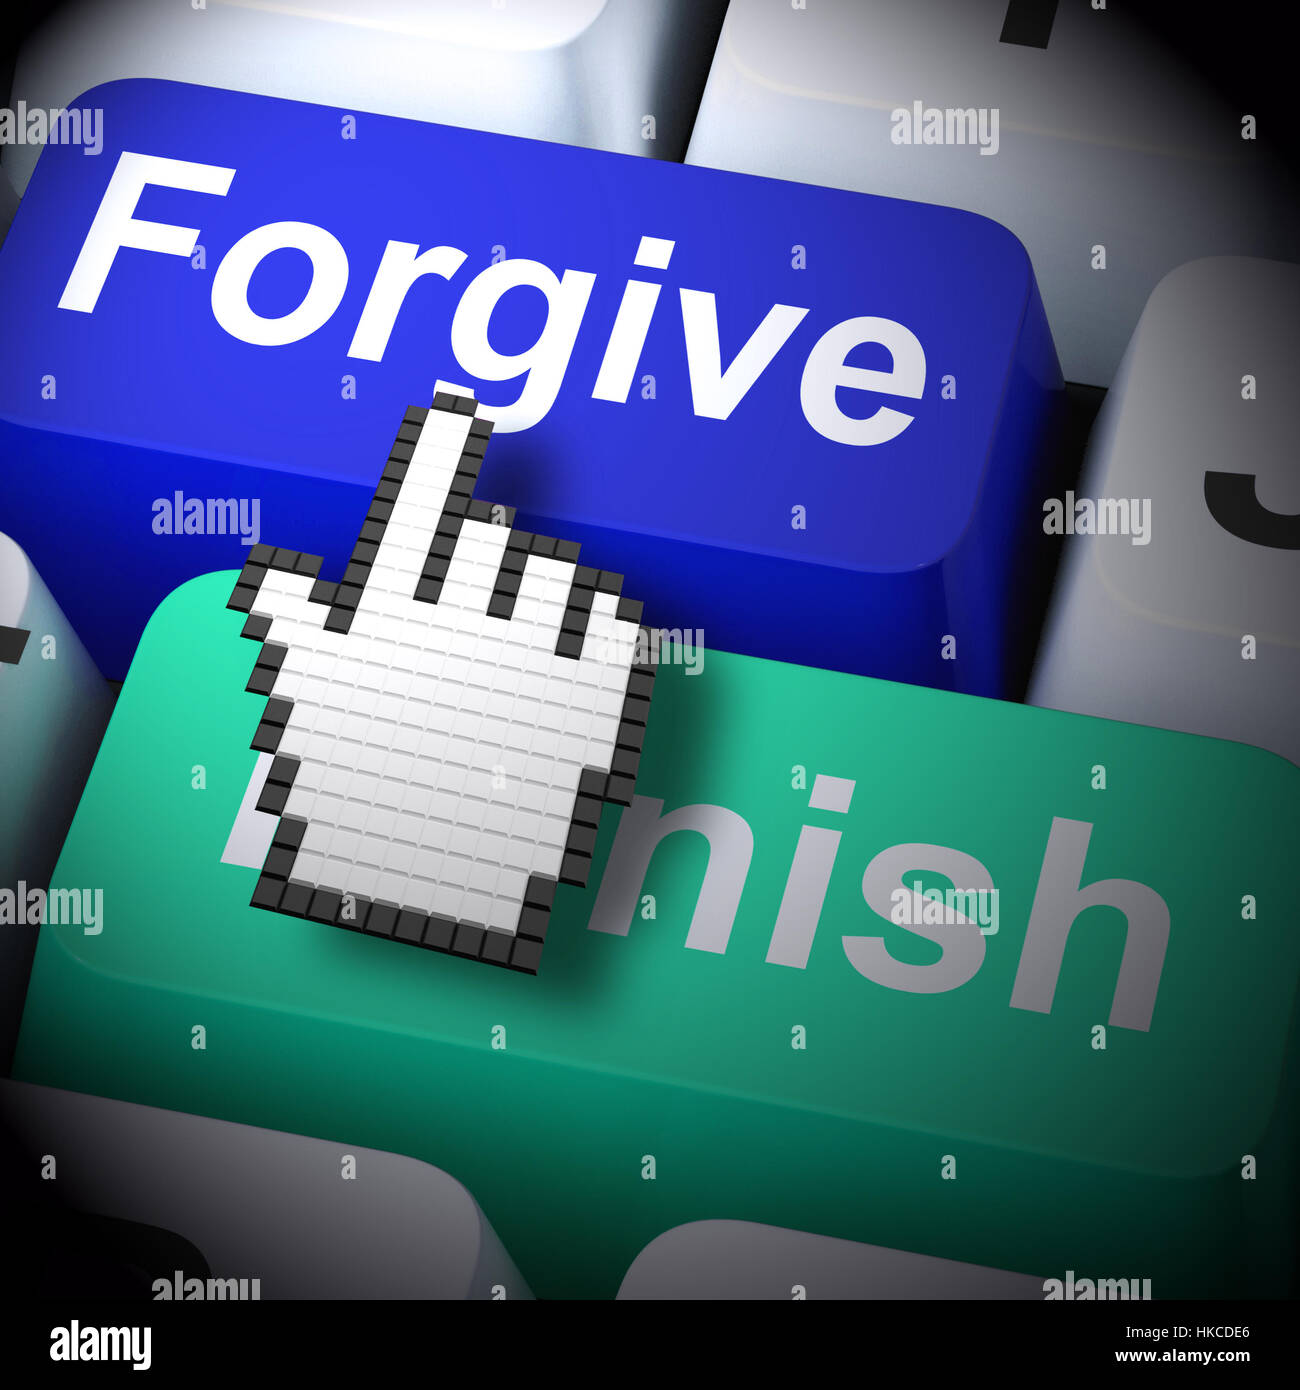 Punish Forgive Computer Showing Punishment or Forgiveness 3d Rendering Stock Photo